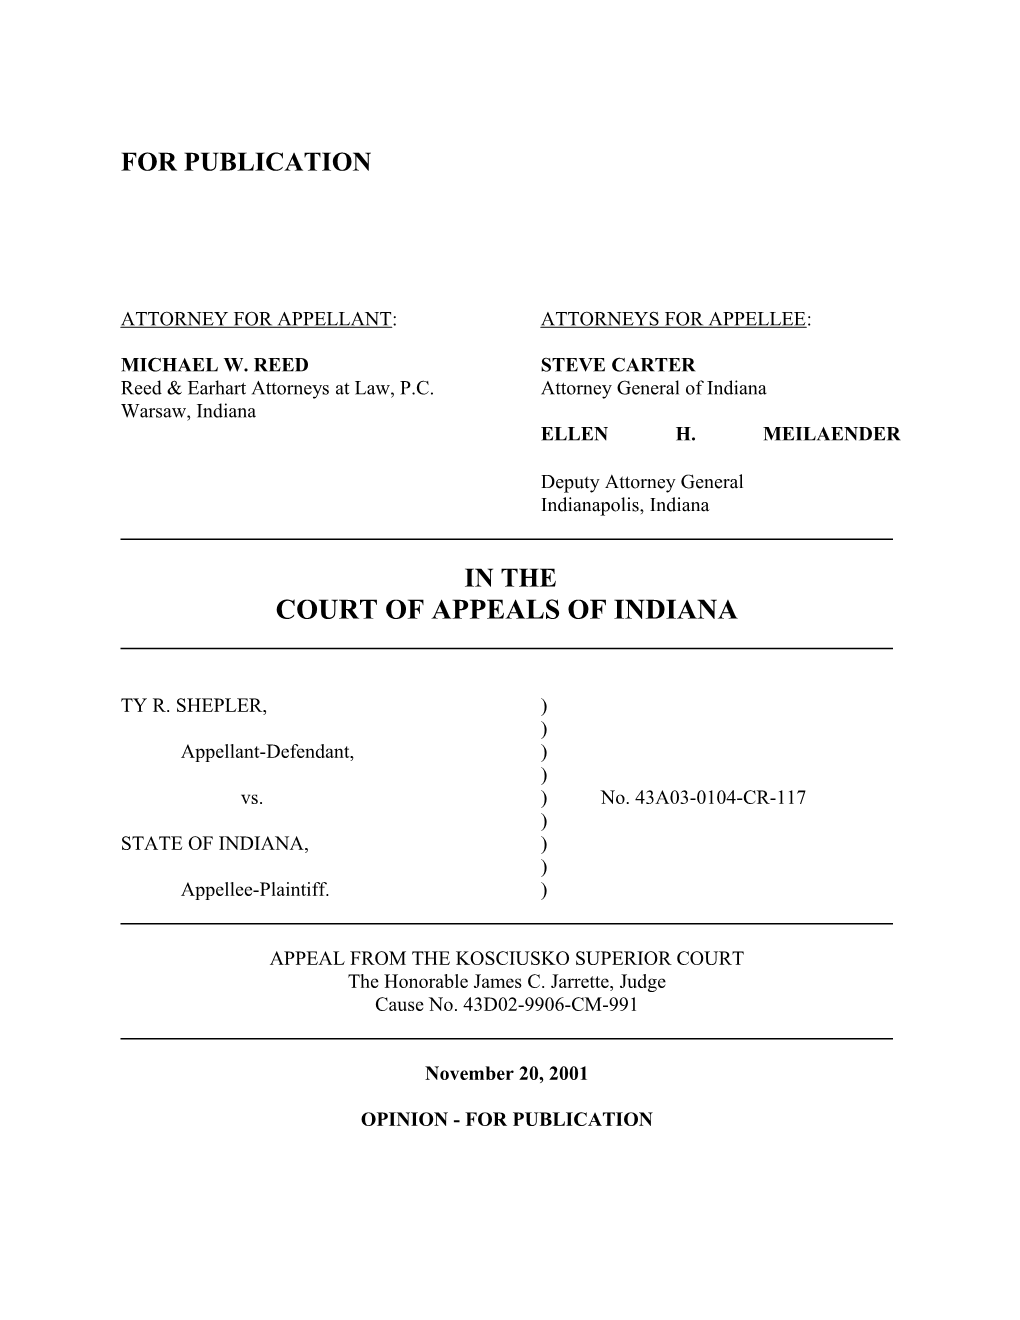 Attorney for Appellant: Attorneys for Appellee s19